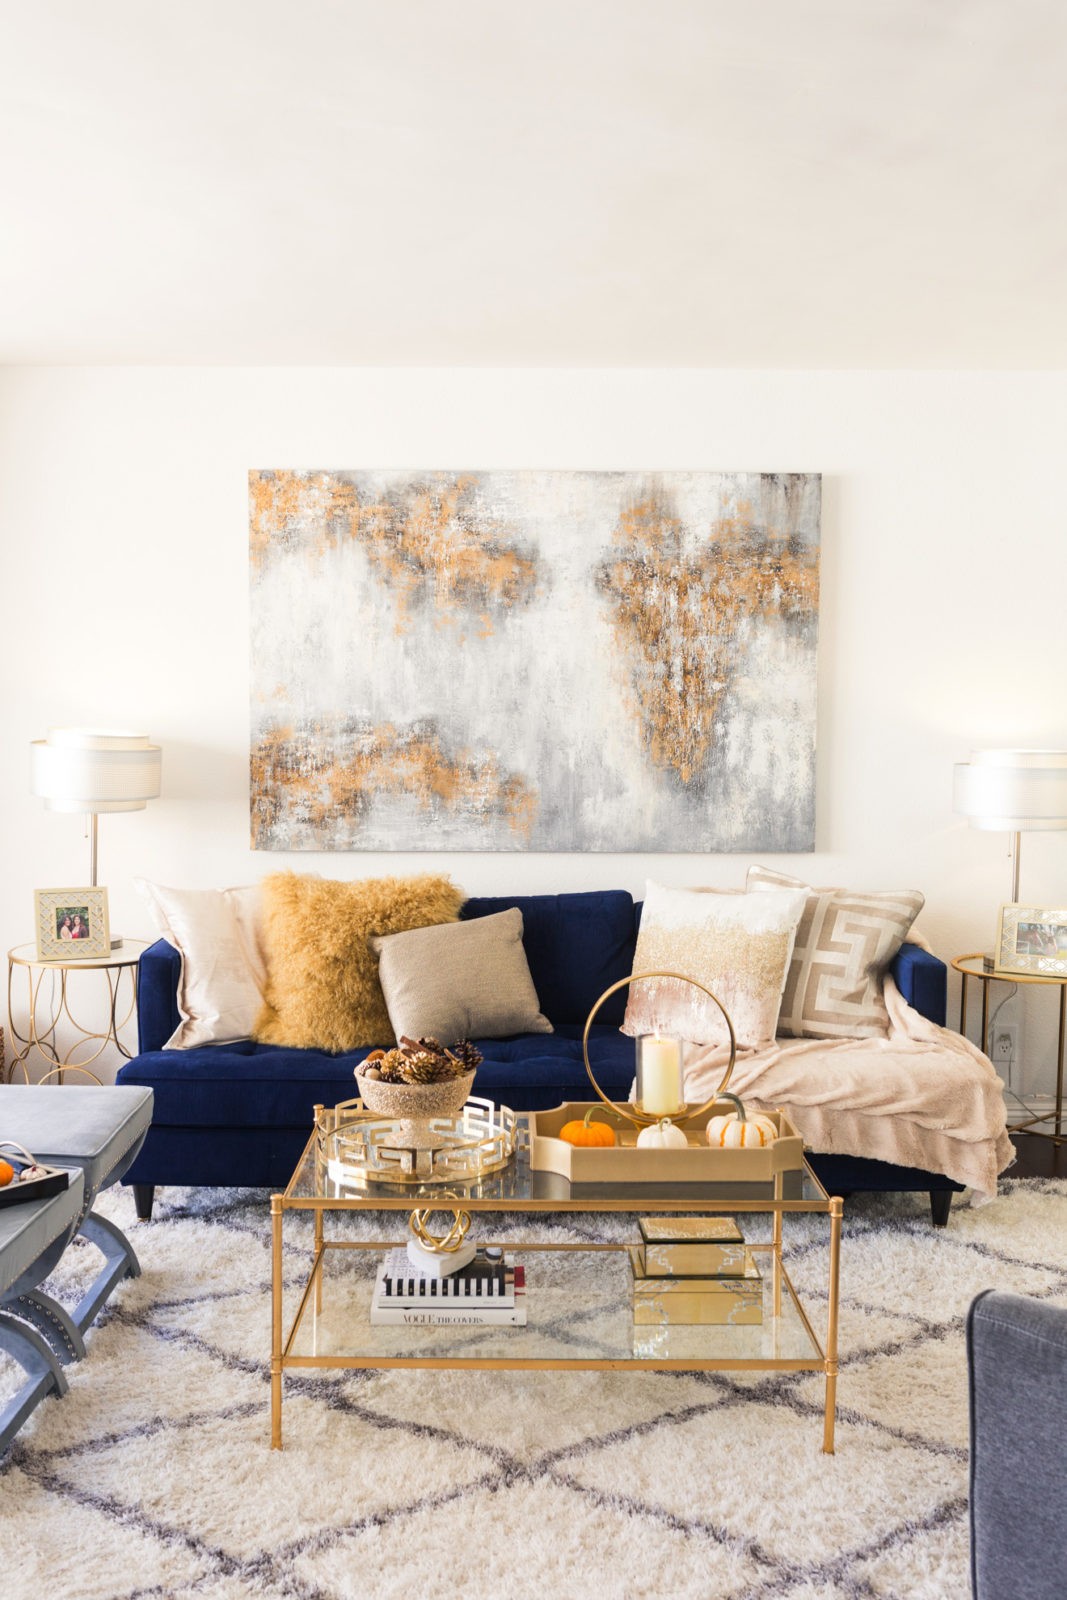 Z Gallerie Fall Decor Ideas by Popular Lifestyle Blogger Laura Lily | Dinner Party Essentials: Hosting Tips, Table Settings Ideas and Bar Cart Inspiration by popular Los Angeles life and style blogger, Laura Lily: image of a living room with a blue velvet couch, gold glass top coffee table, cream and gold throw pillows, and a white shag rug. 